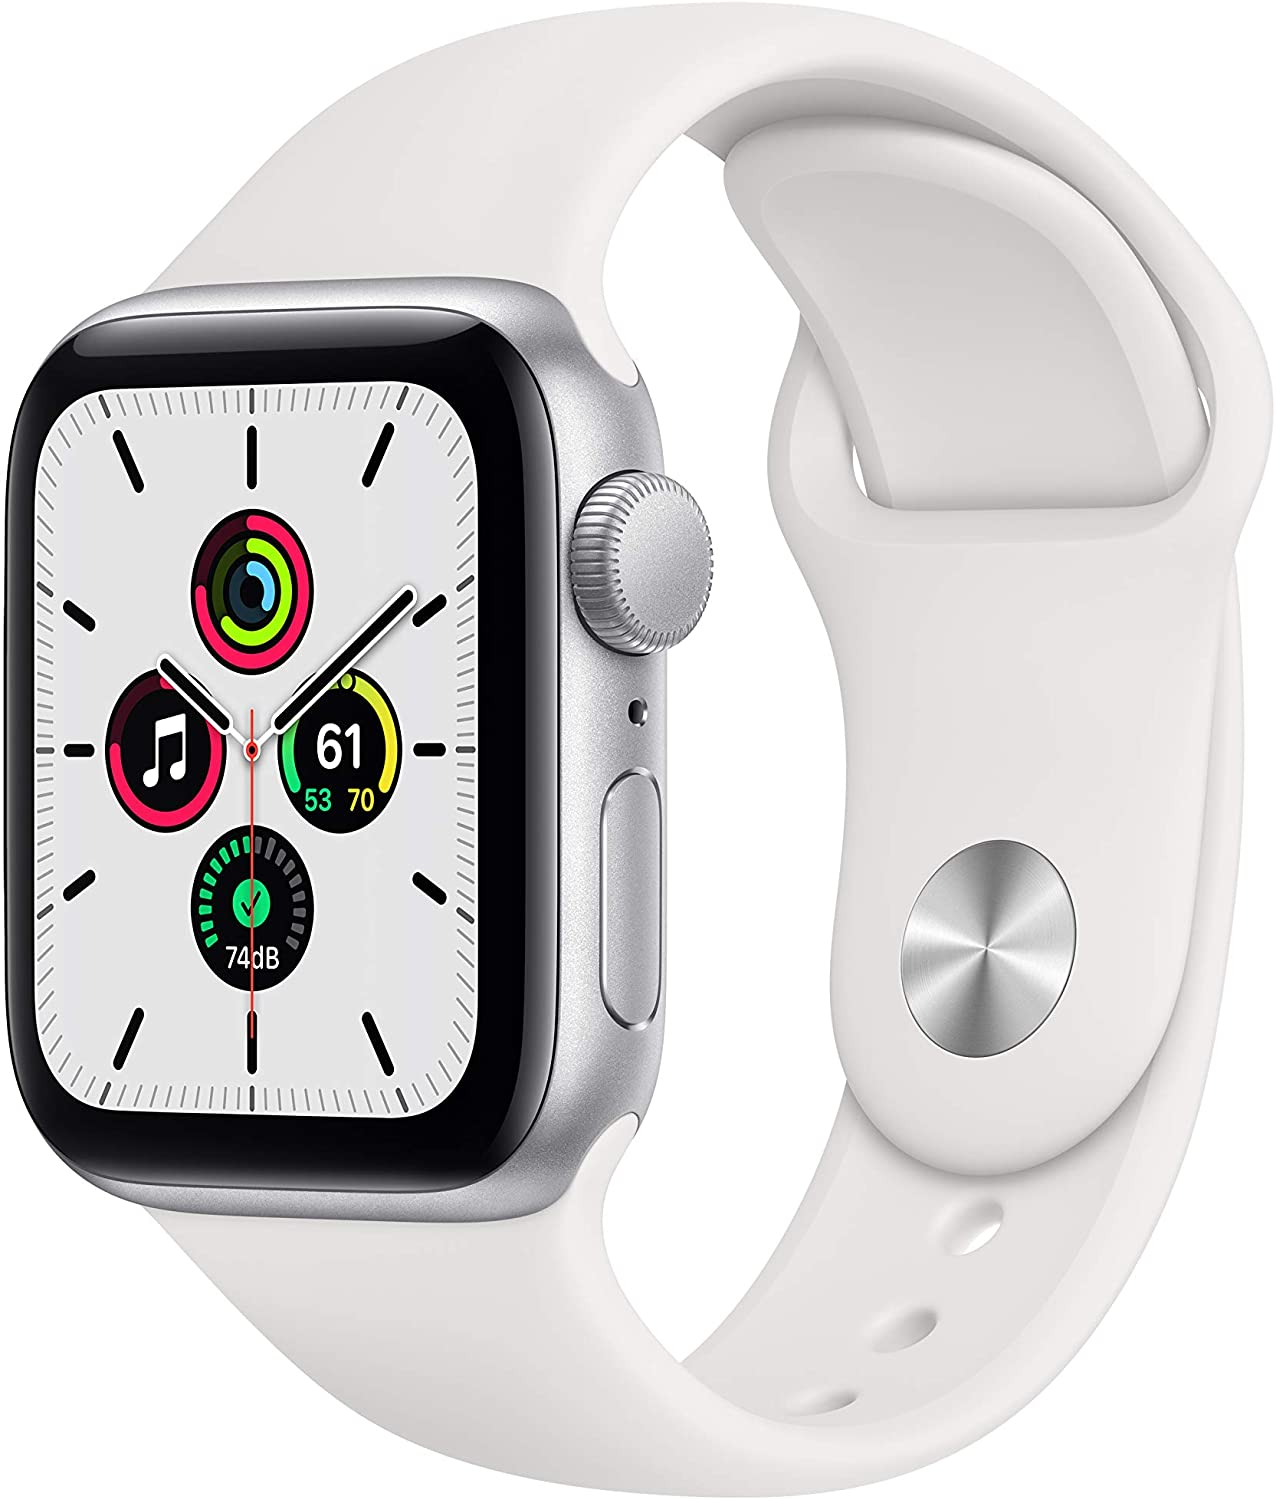 In 2022, which Apple Watches should you buy and which ones should you avoid